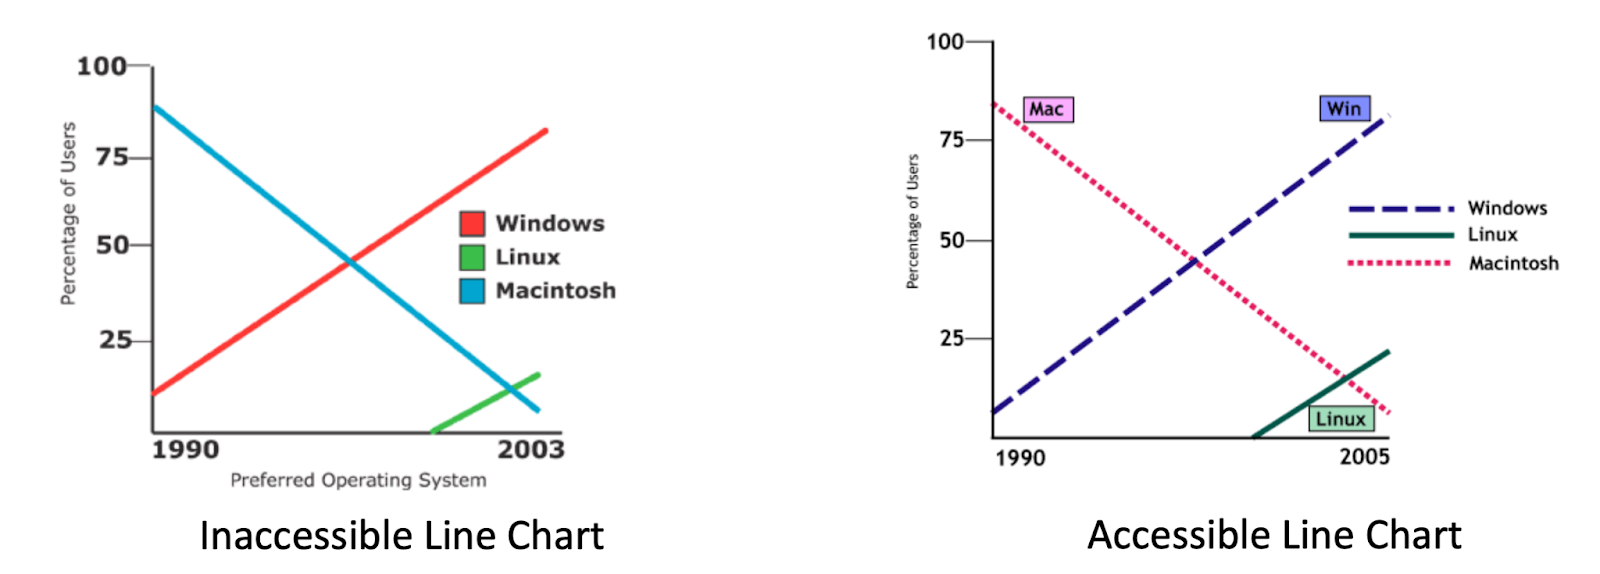 Two line charts with the same data, displayed side by side. The first is above the heading 'Inaccessible Line Chart'. The second appears above the heading “Accessible Line Chart”. Both charts are entitled 'Preferred Operating System'. The X-axes displays a range of years beginning with 1990 and ending with 2003; the Y-axes is labelled “Percentage of Users” and goes from 0 to 100. Three lines appear on each chart. The first line, “Windows”, goes from somewhere around 10% of users in 1990 to around 85% of users in 2003. The second line, Linux, begins at 0% around 1999 and climbs to about 10% in 2003. The third line, Macintosh, begins at 85% in 1990 and drops to about 5% in 2003.